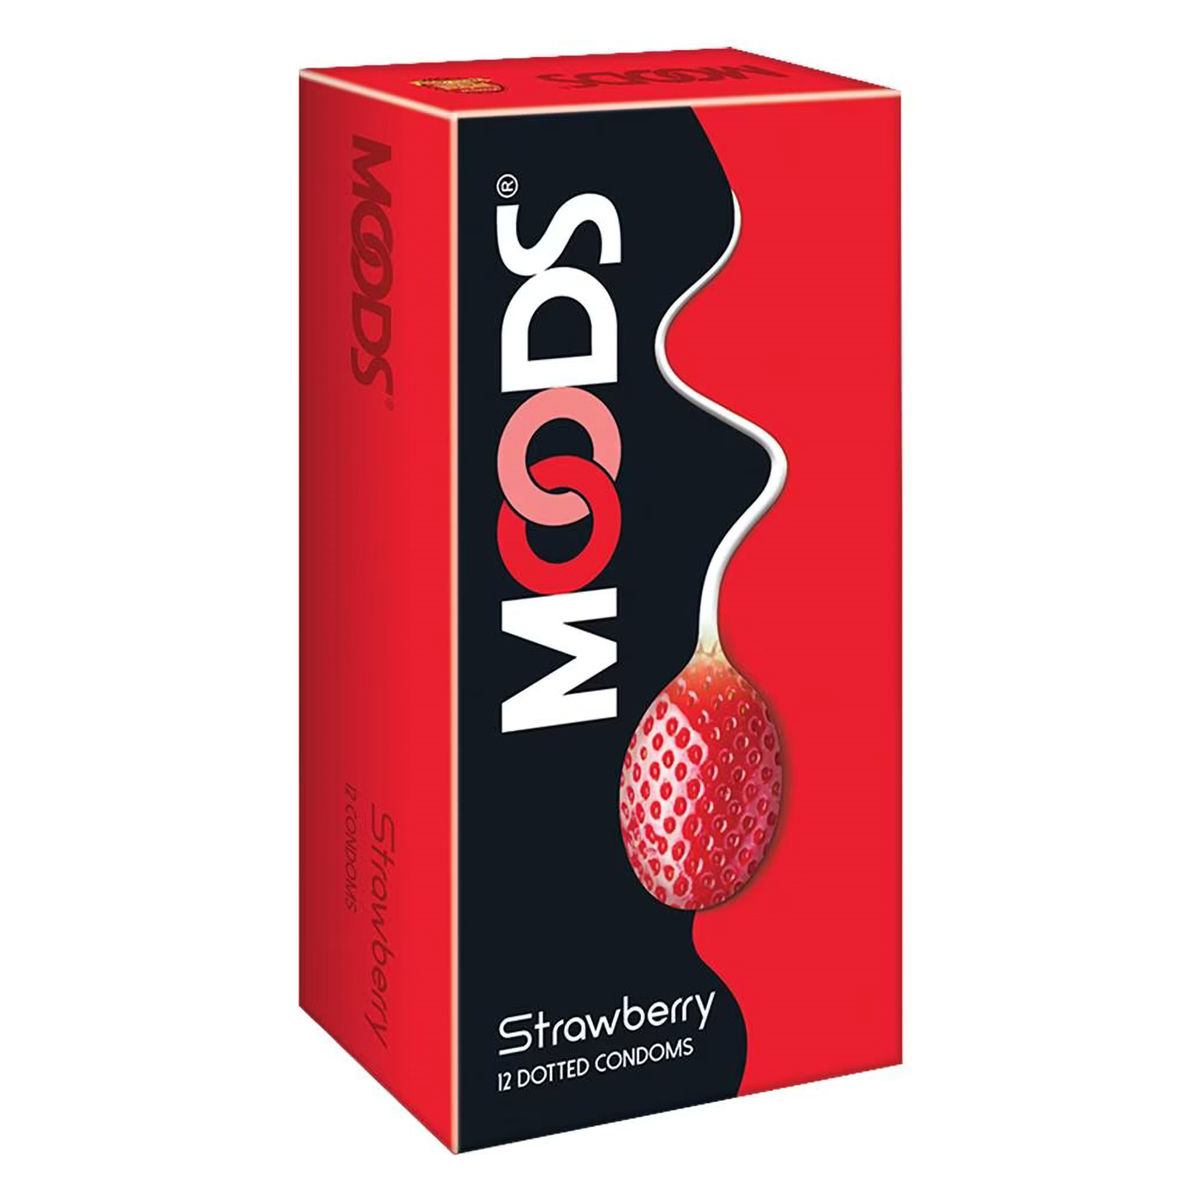 Buy Moods Strawberry Flavour Condoms, 12 Count Online